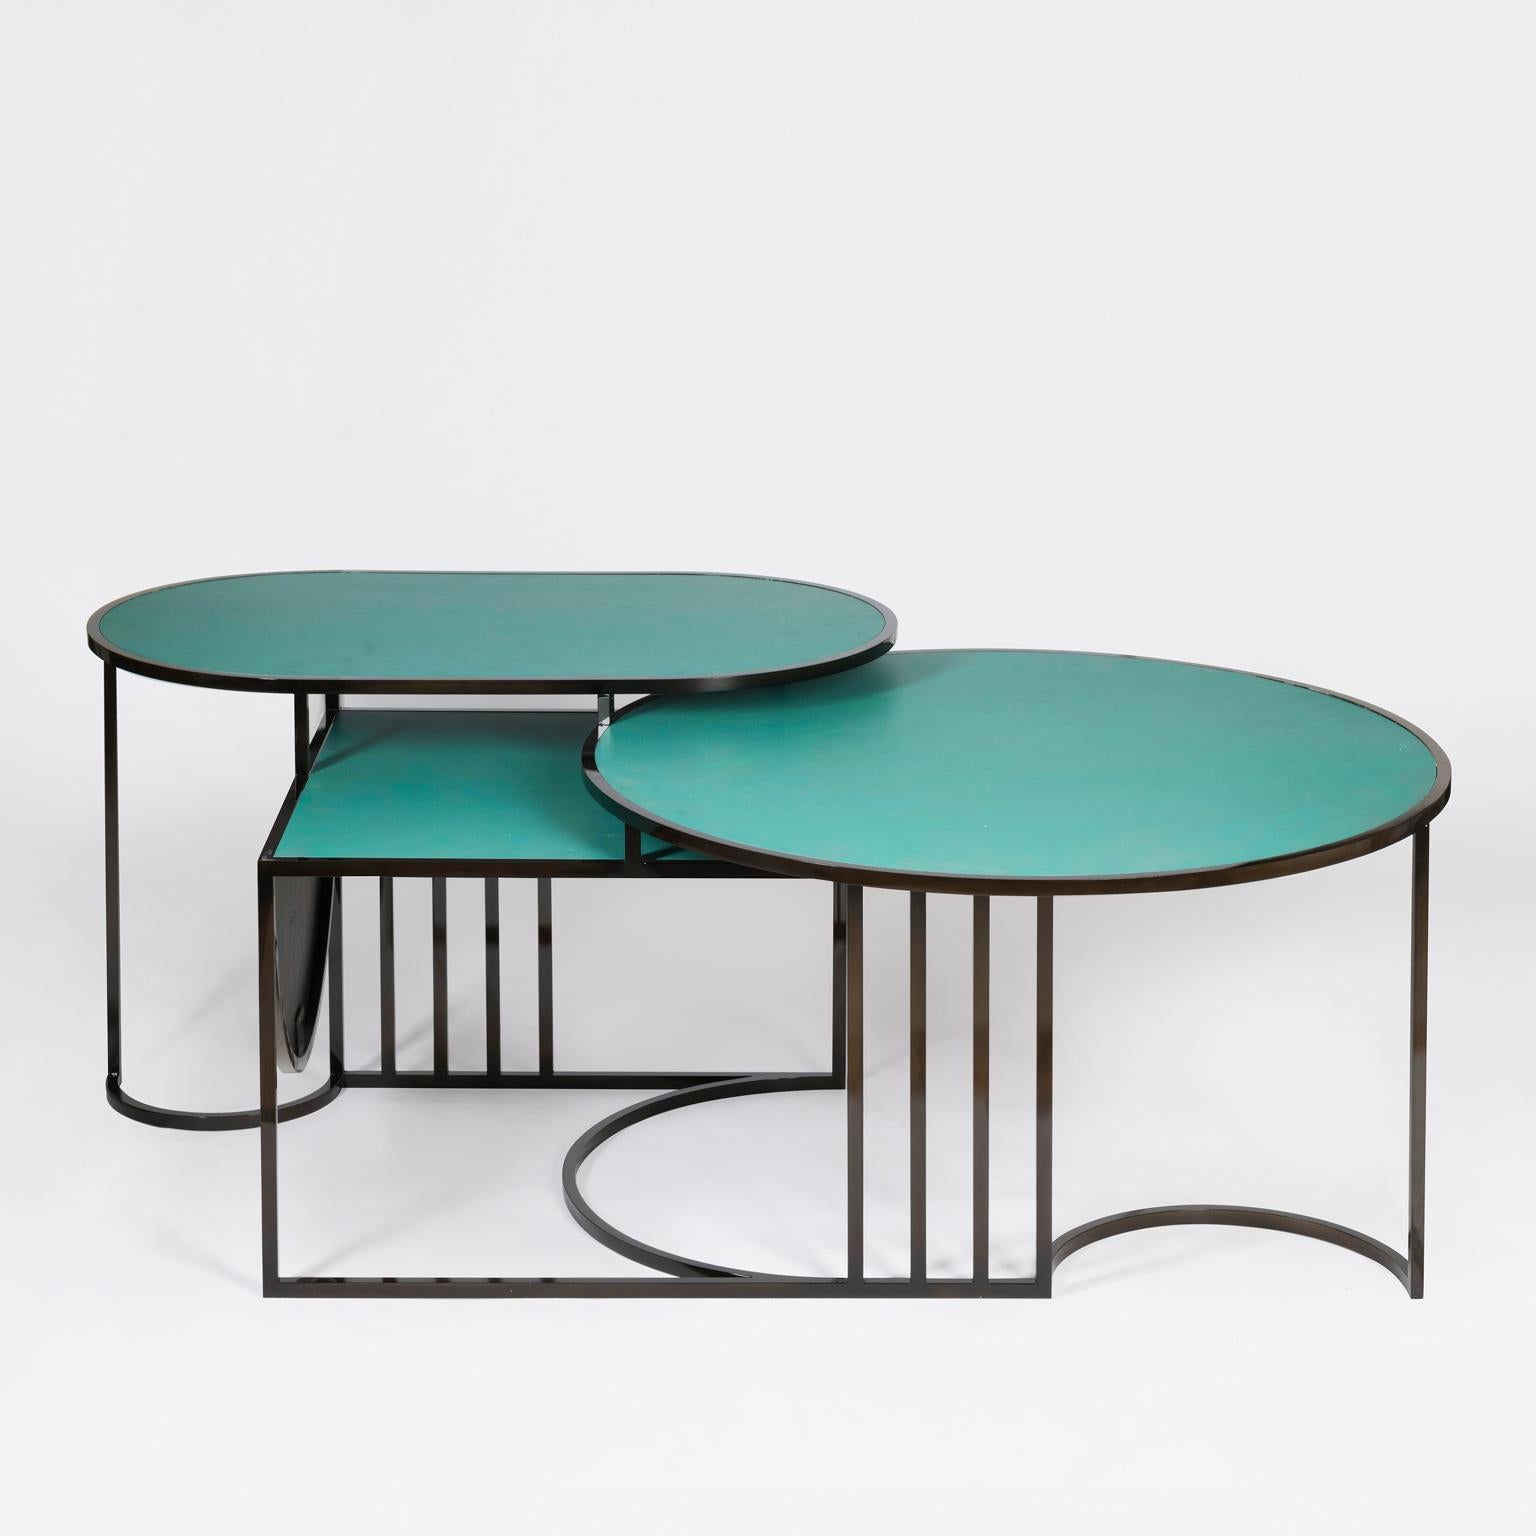 *This table is a sample, it has some scratches and imperfections, please see photos attached.*

The Orbit Coffee table is constructed from three tiered tops: round, oblong and square, each resting at different height level.
 

Lara Bohinc’s new